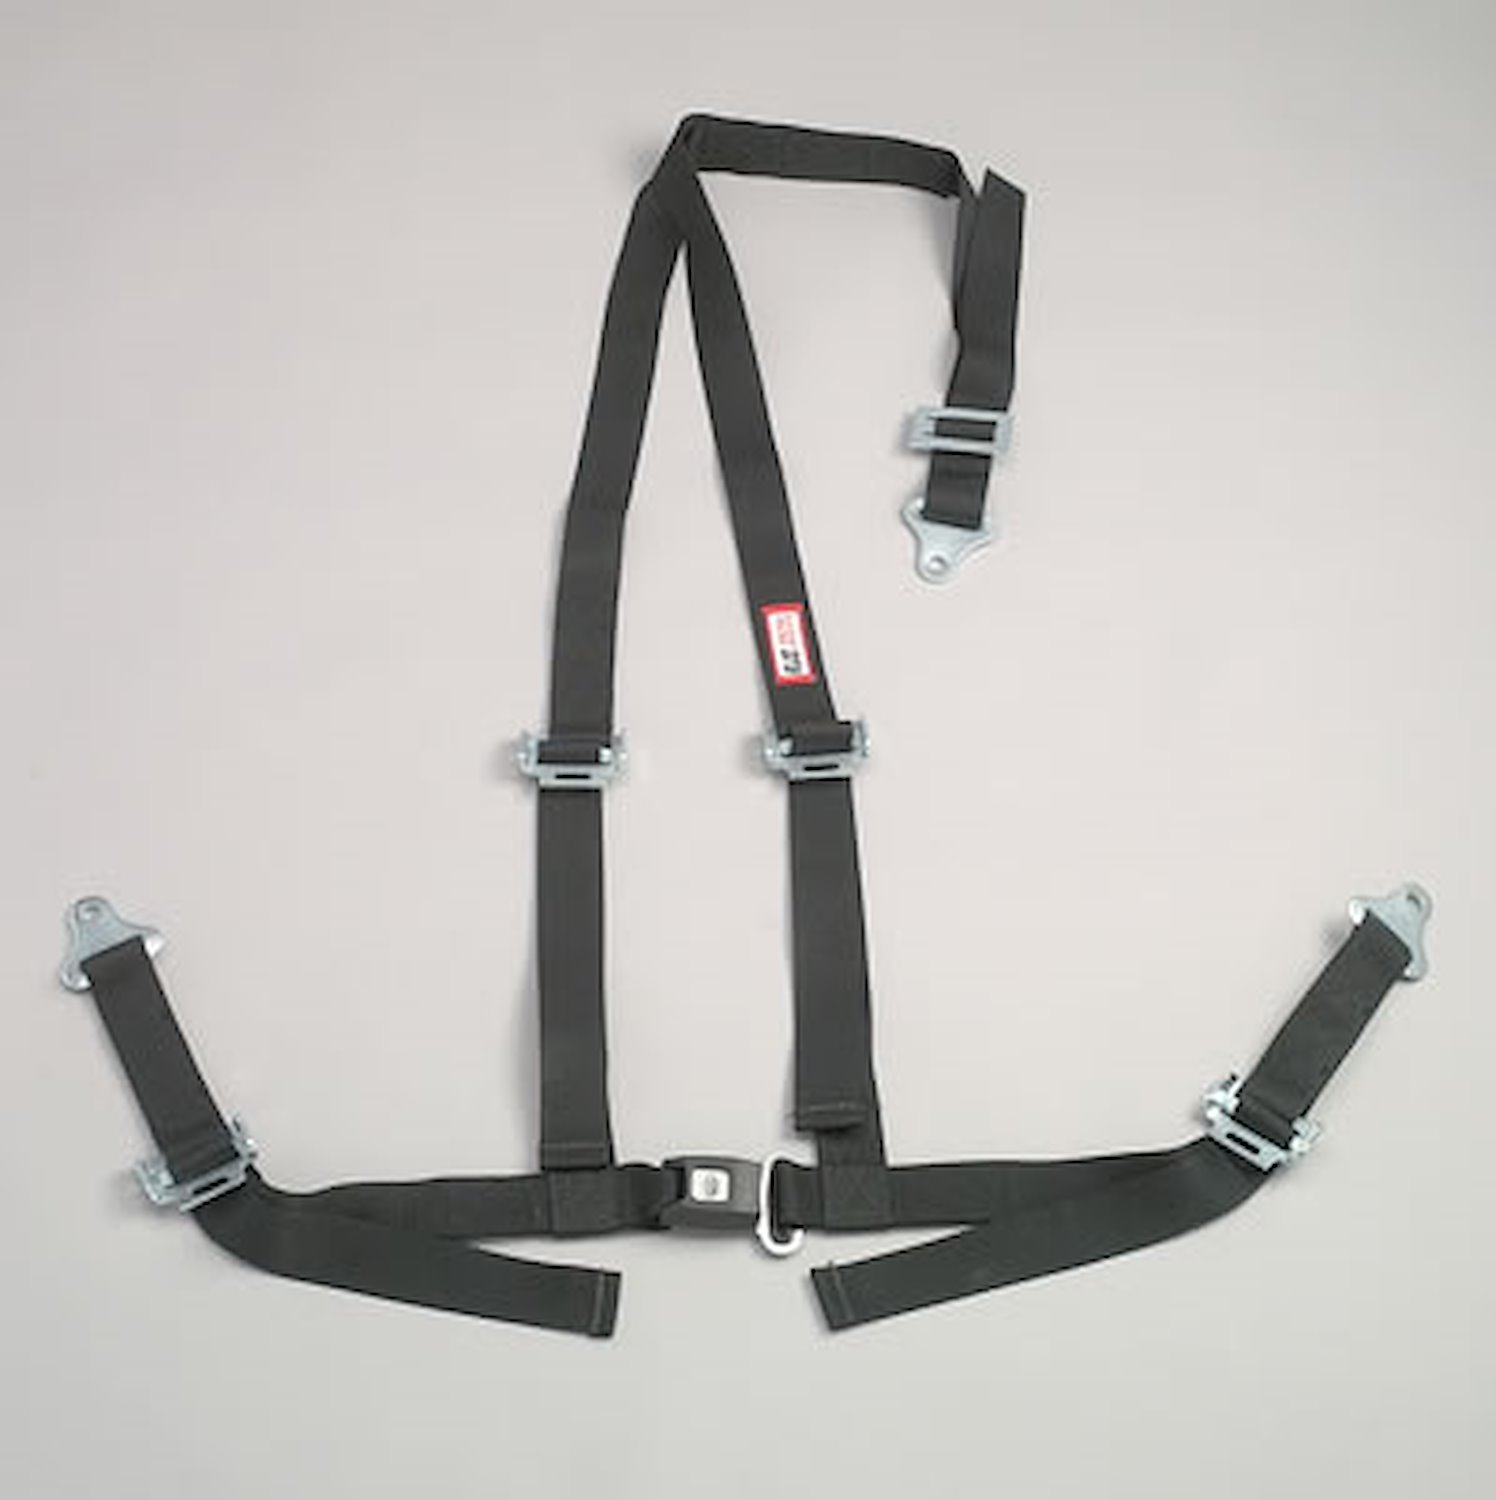 NON-SFI B&T HARNESS 2 PULL DOWN Lap Belt SNAP 2 S. H. Individual FLOOR Mount WRAP/SNAP w/STERNUM STRAP GRAY